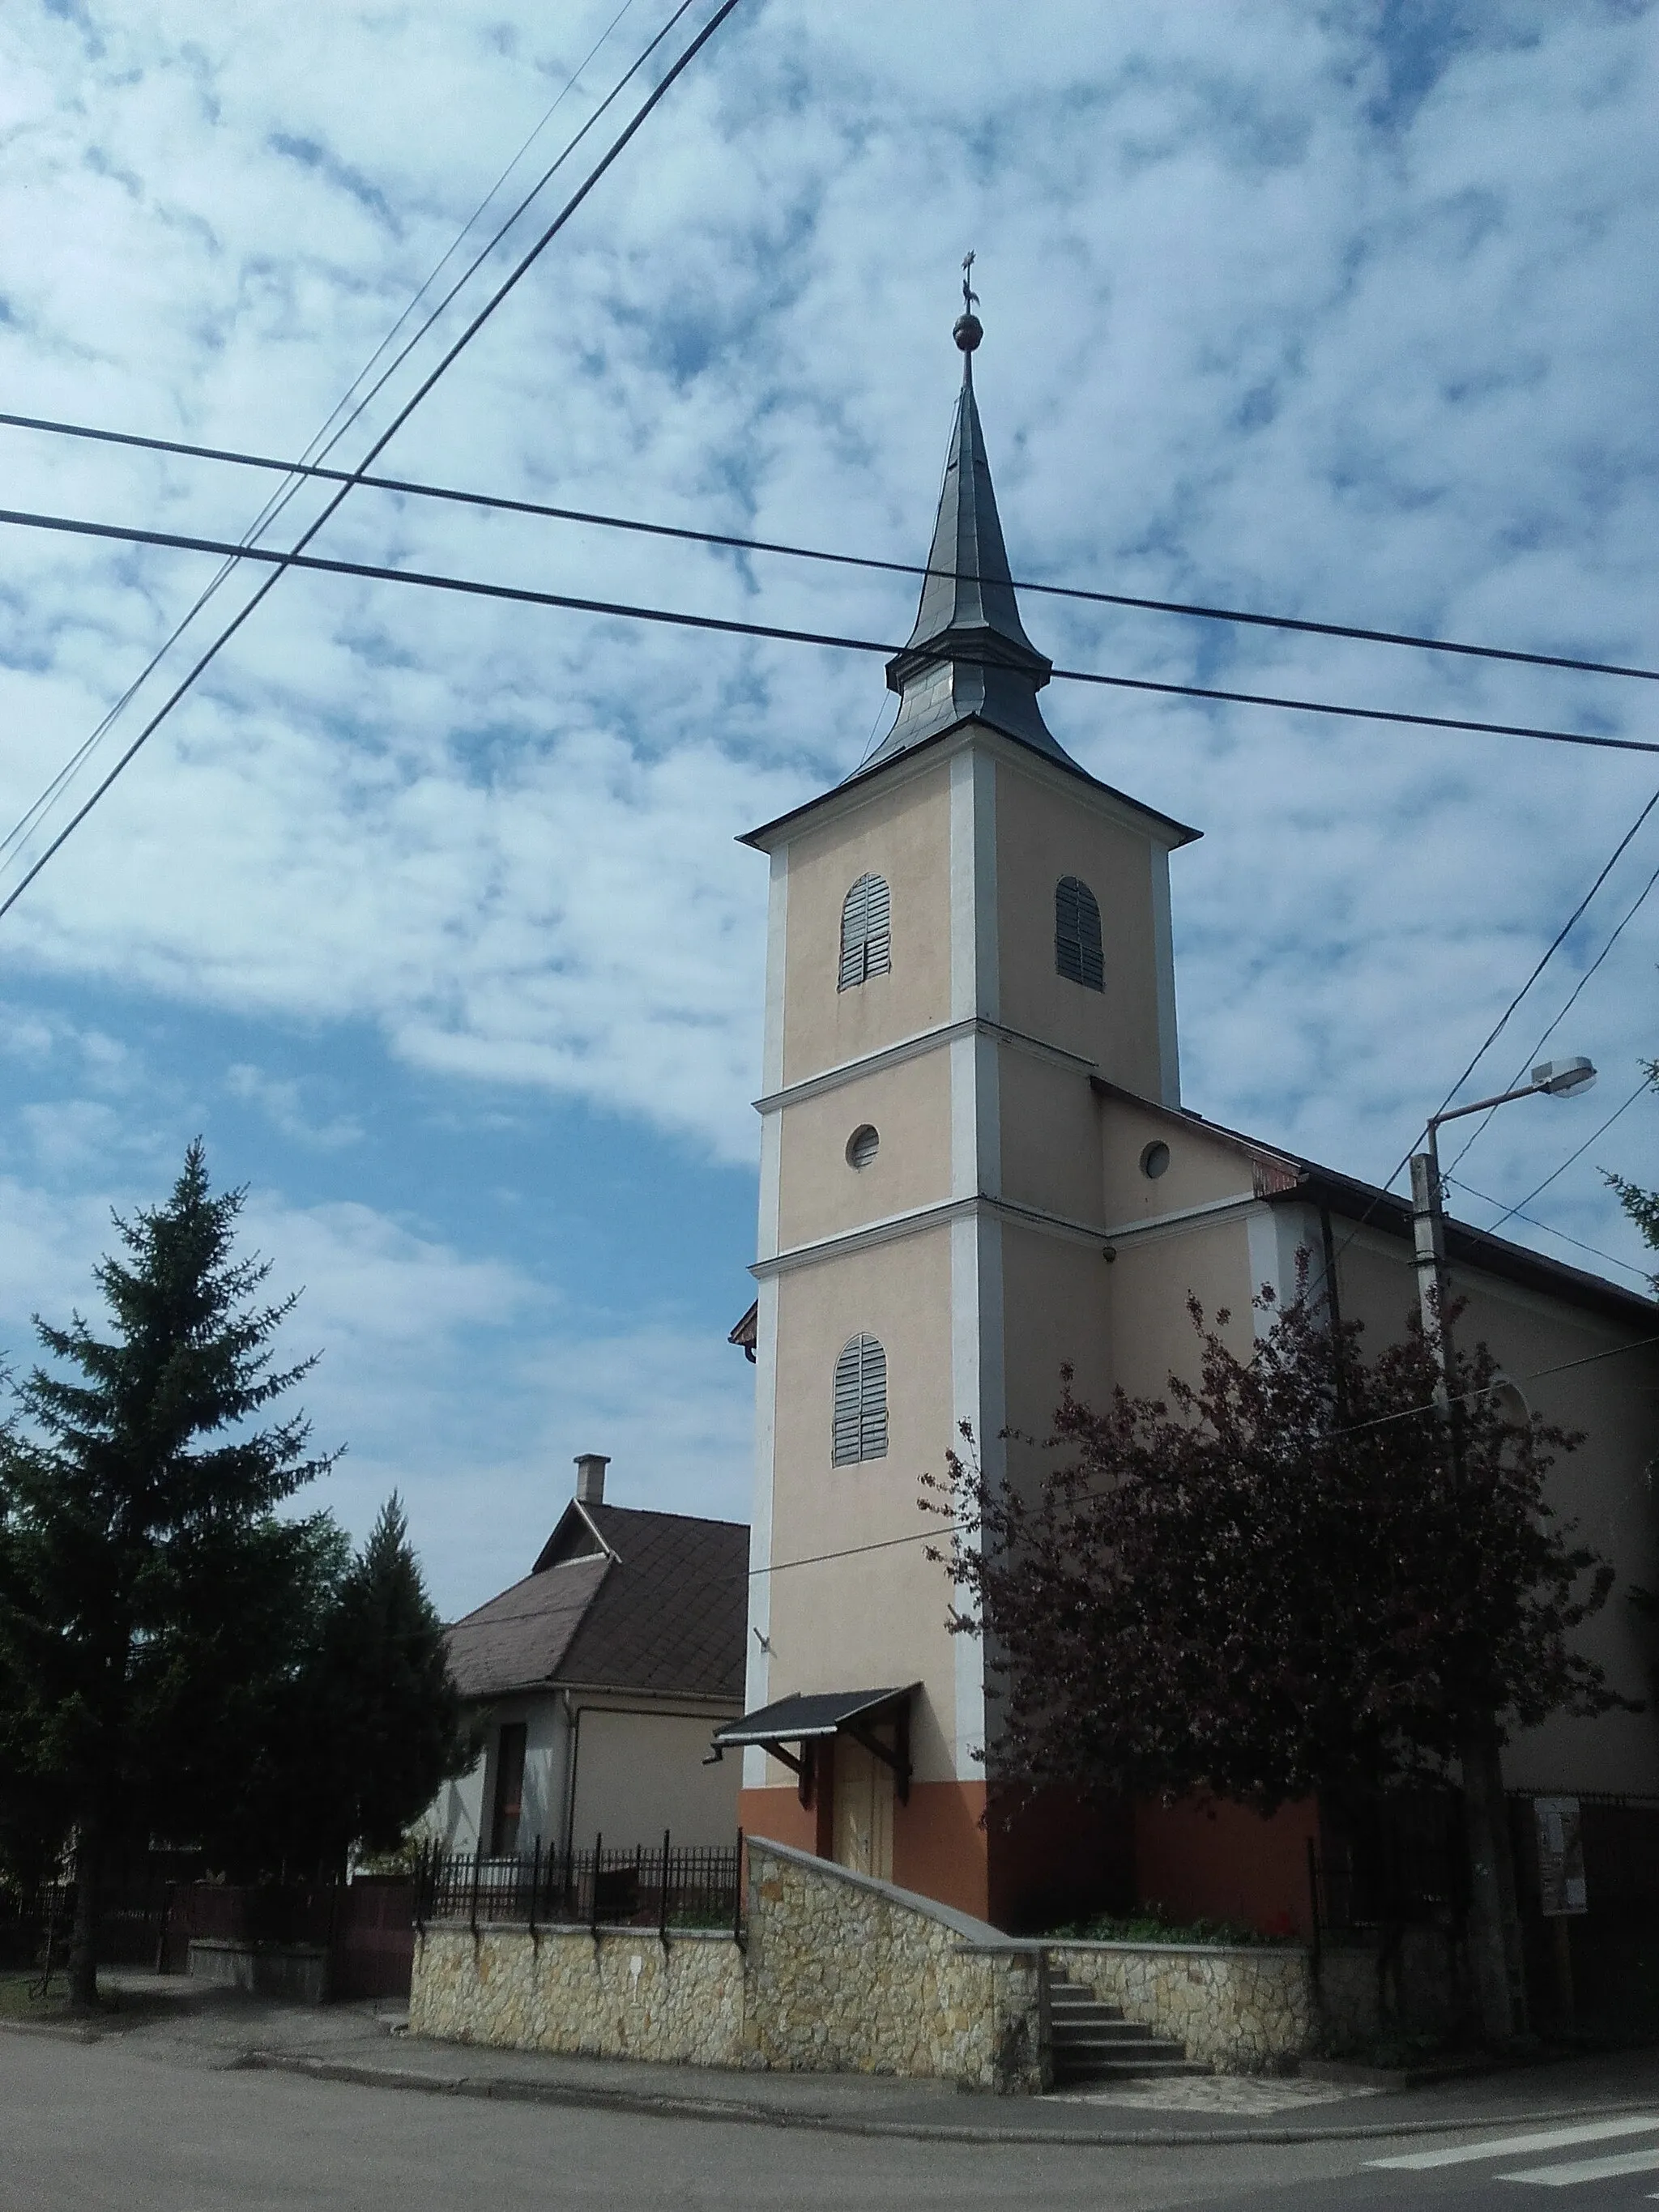 Photo showing: The Reformed Church of Alsódobsza, Hungary, built in 1807